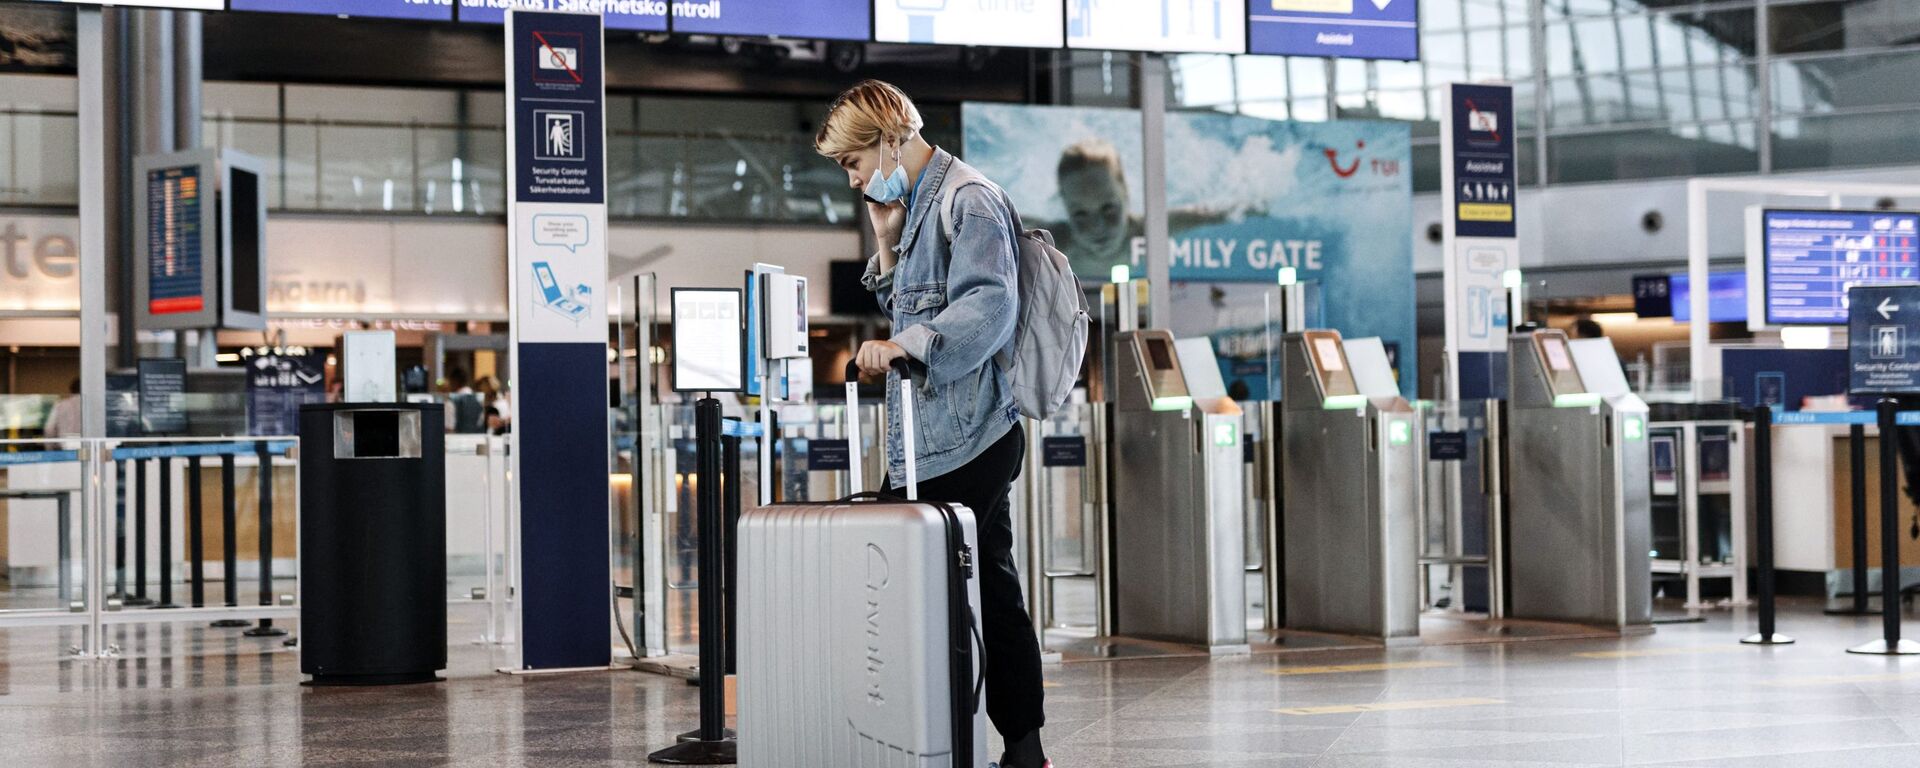 A passenger wears a face mask at the Helsinki-Vantaa airport in Vantaa, Finland on July 13, 2020 as Finnish Government eased COVID-19 pandemic in and out travel restrictions with several EU countries. - Sputnik International, 1920, 17.09.2021